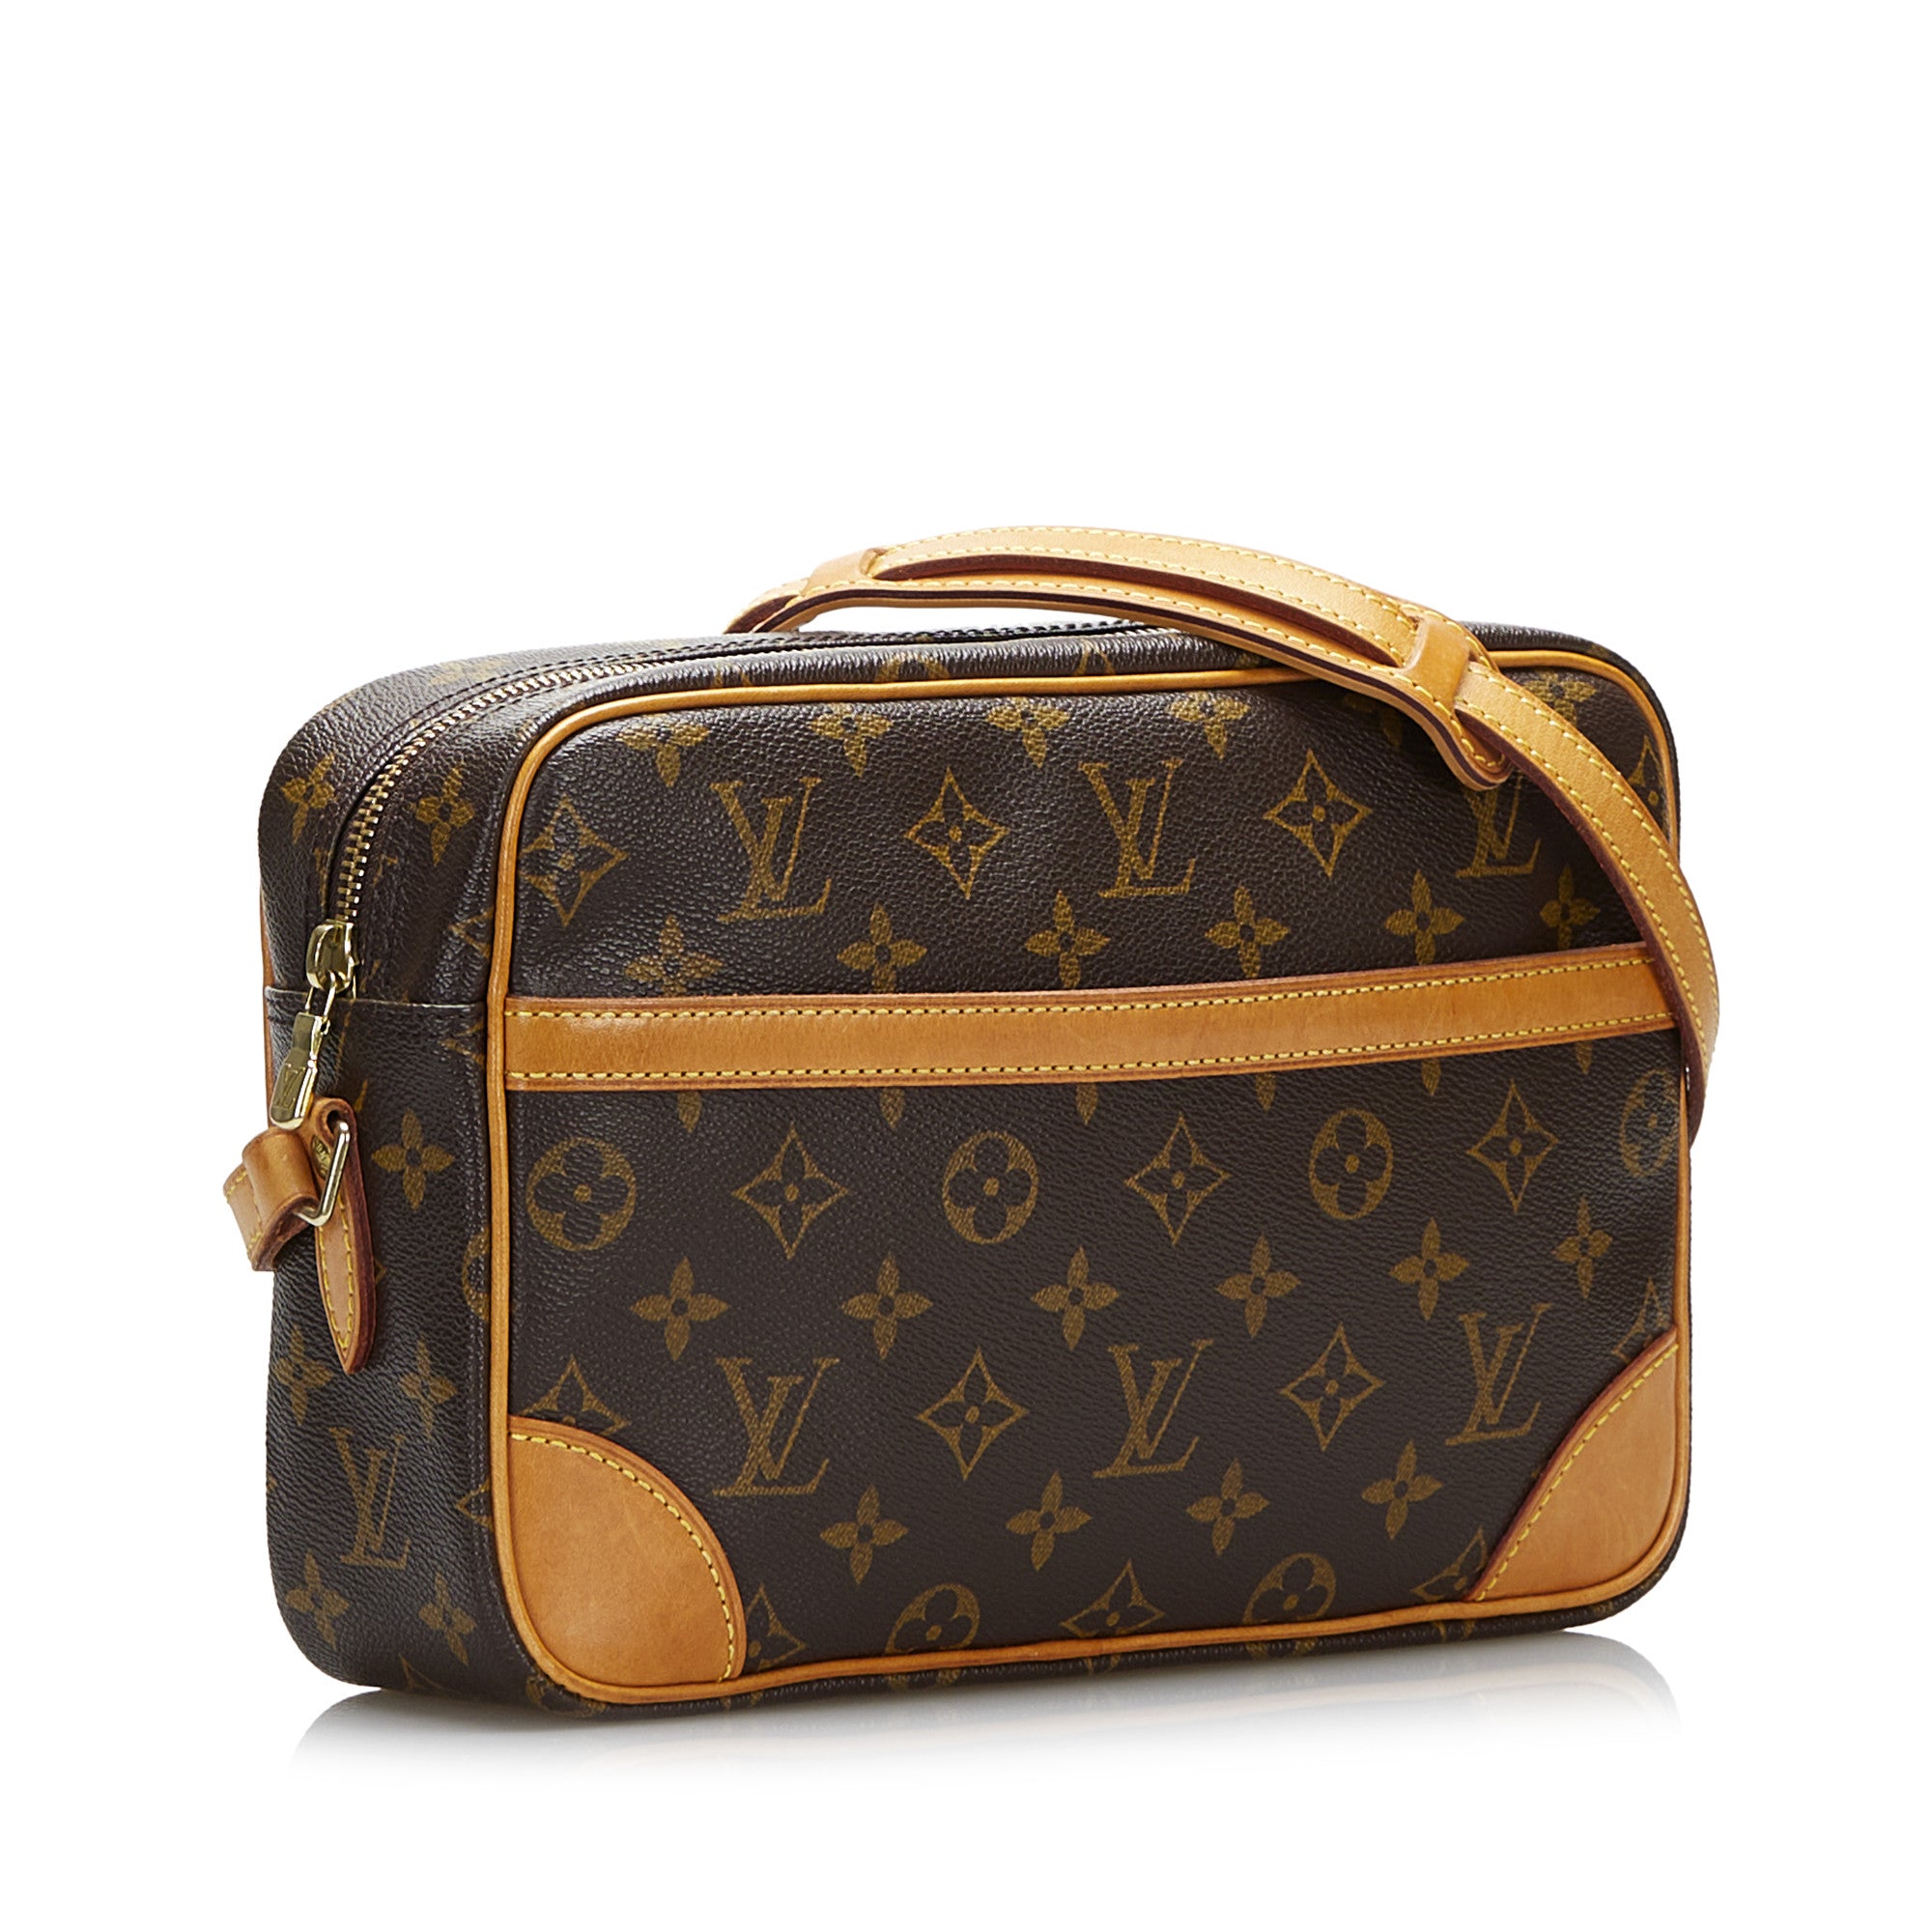 Vintage Louis Vuitton Trocadero Bag With Monogram From the -  Canada